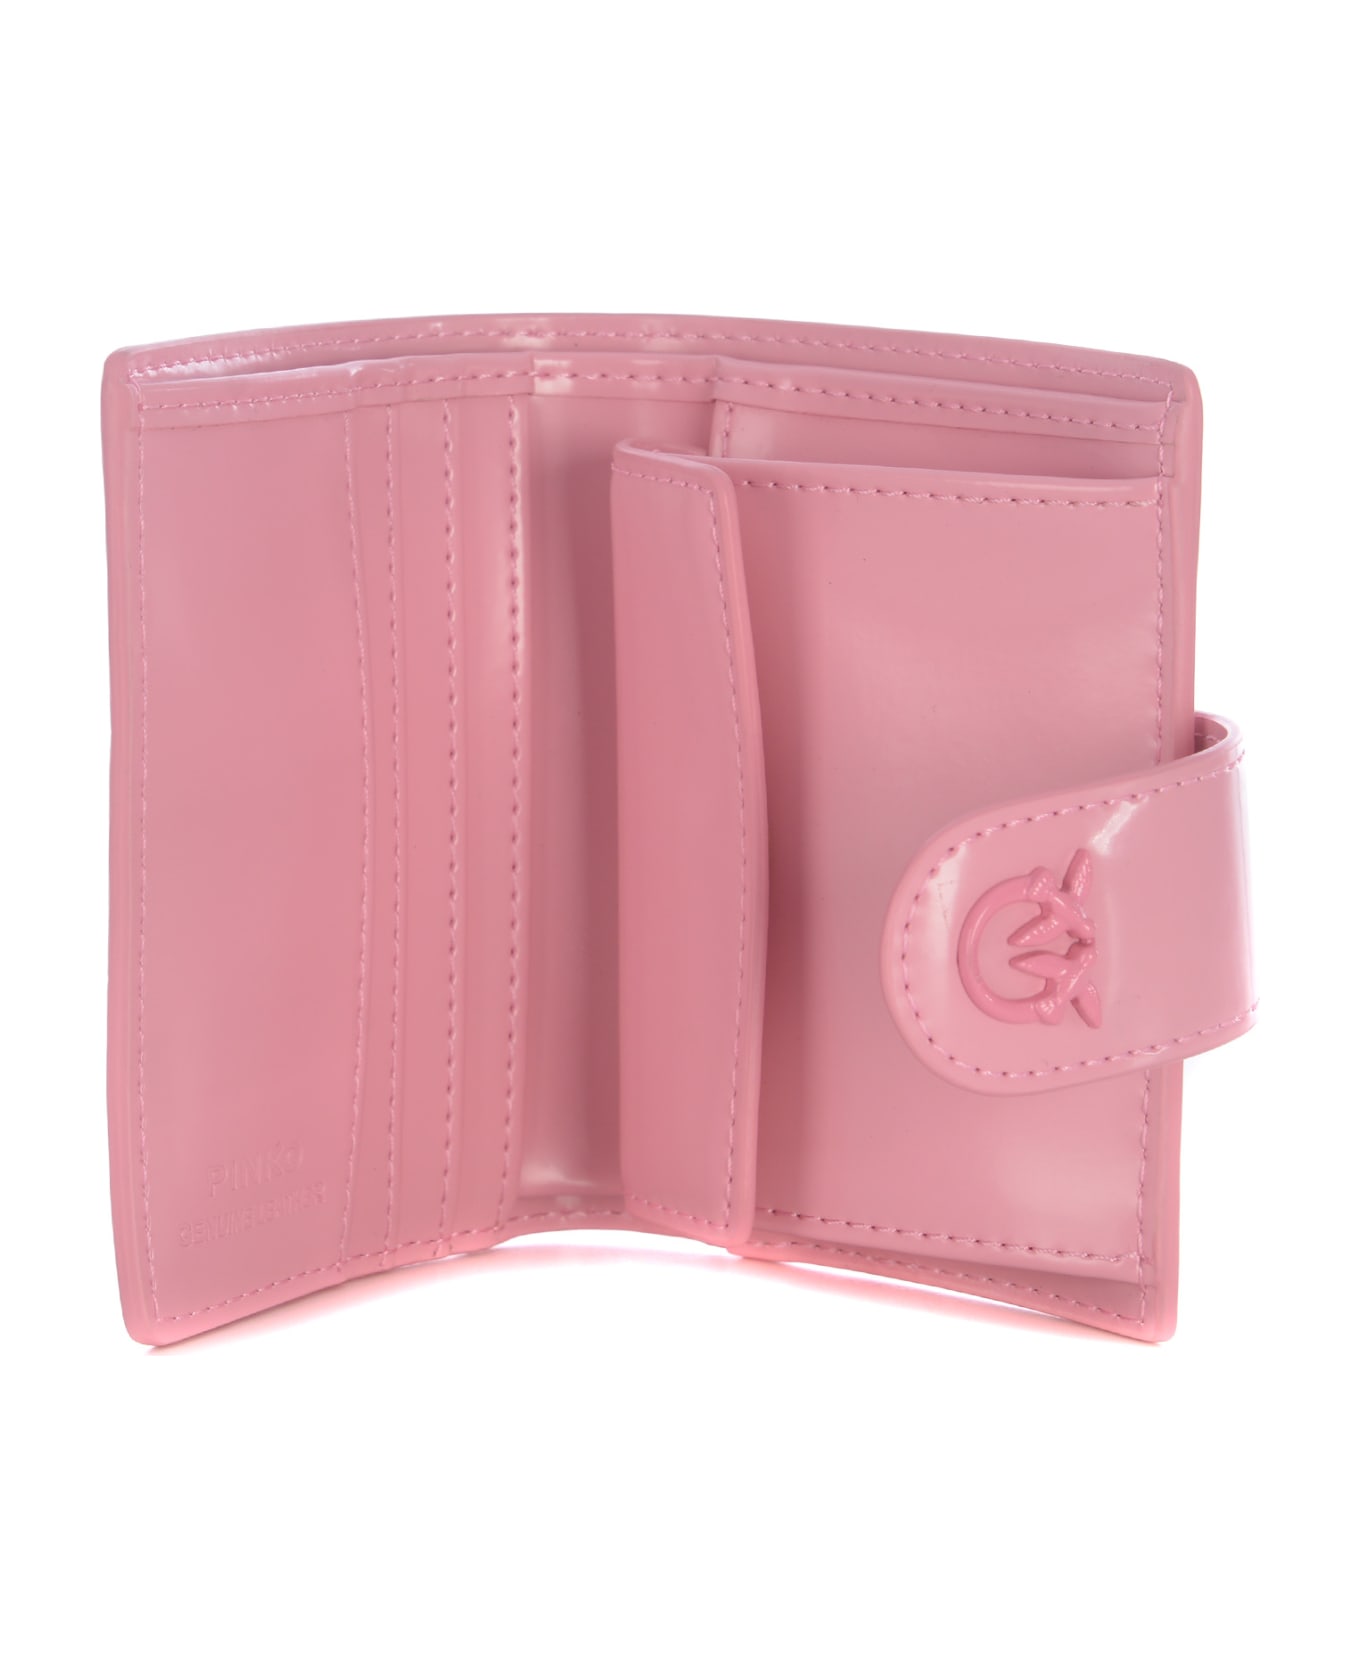 Pinko Wallet Pinko "love Birds" Made Of Leather - Rosa lucido